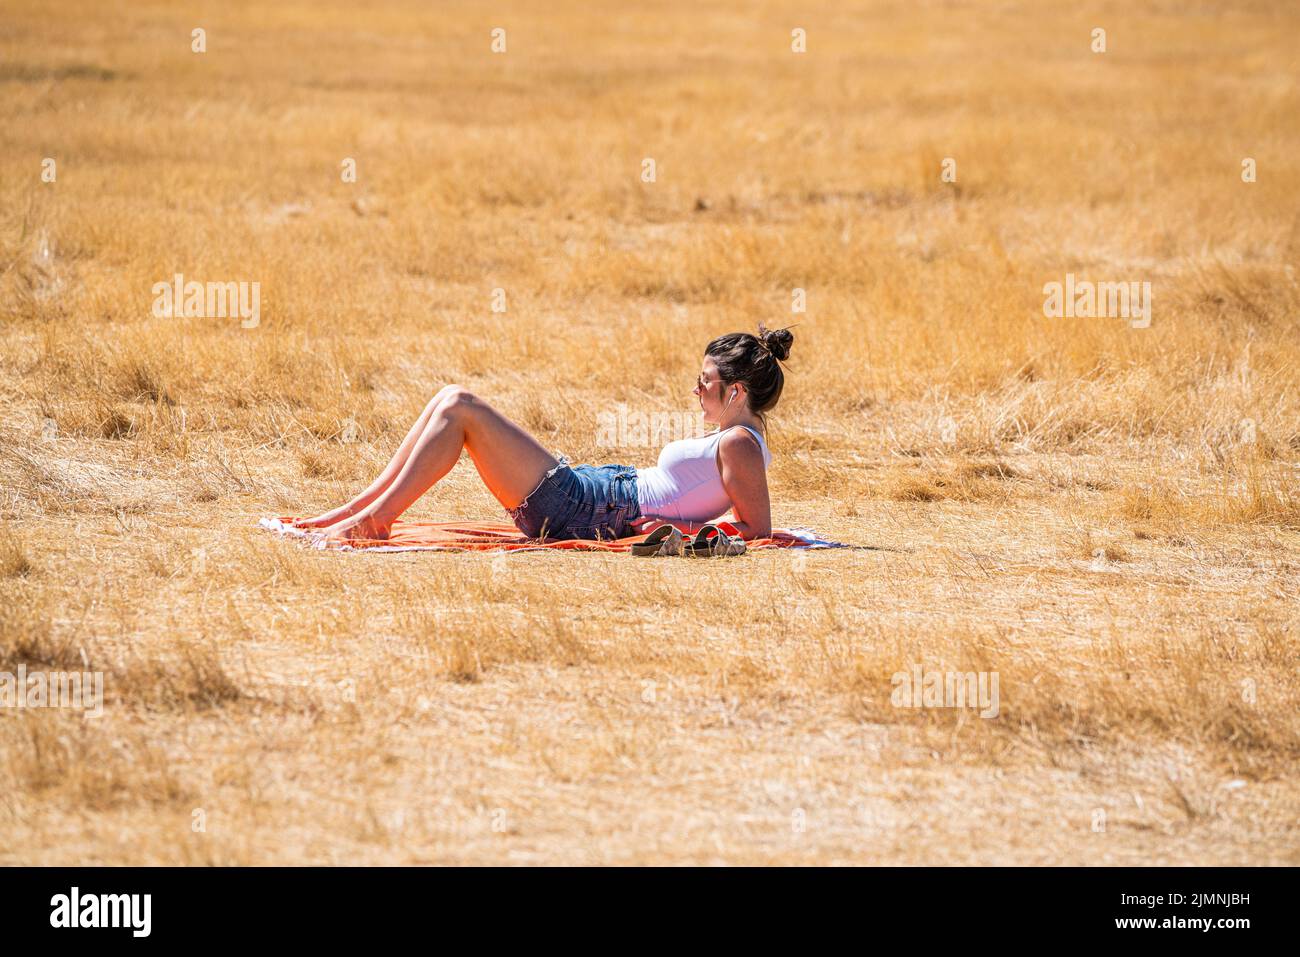 Wimbledon, London, UK. 7 August 2022  A woman sunbathing  on the parched grass on Wimbledon Common  on another  hot day  as the UK's heatwave and drought continues into August, with temperatures expected to reach  above 30celsius  by next week Credit. amer ghazzal/Alamy Live News Stock Photo